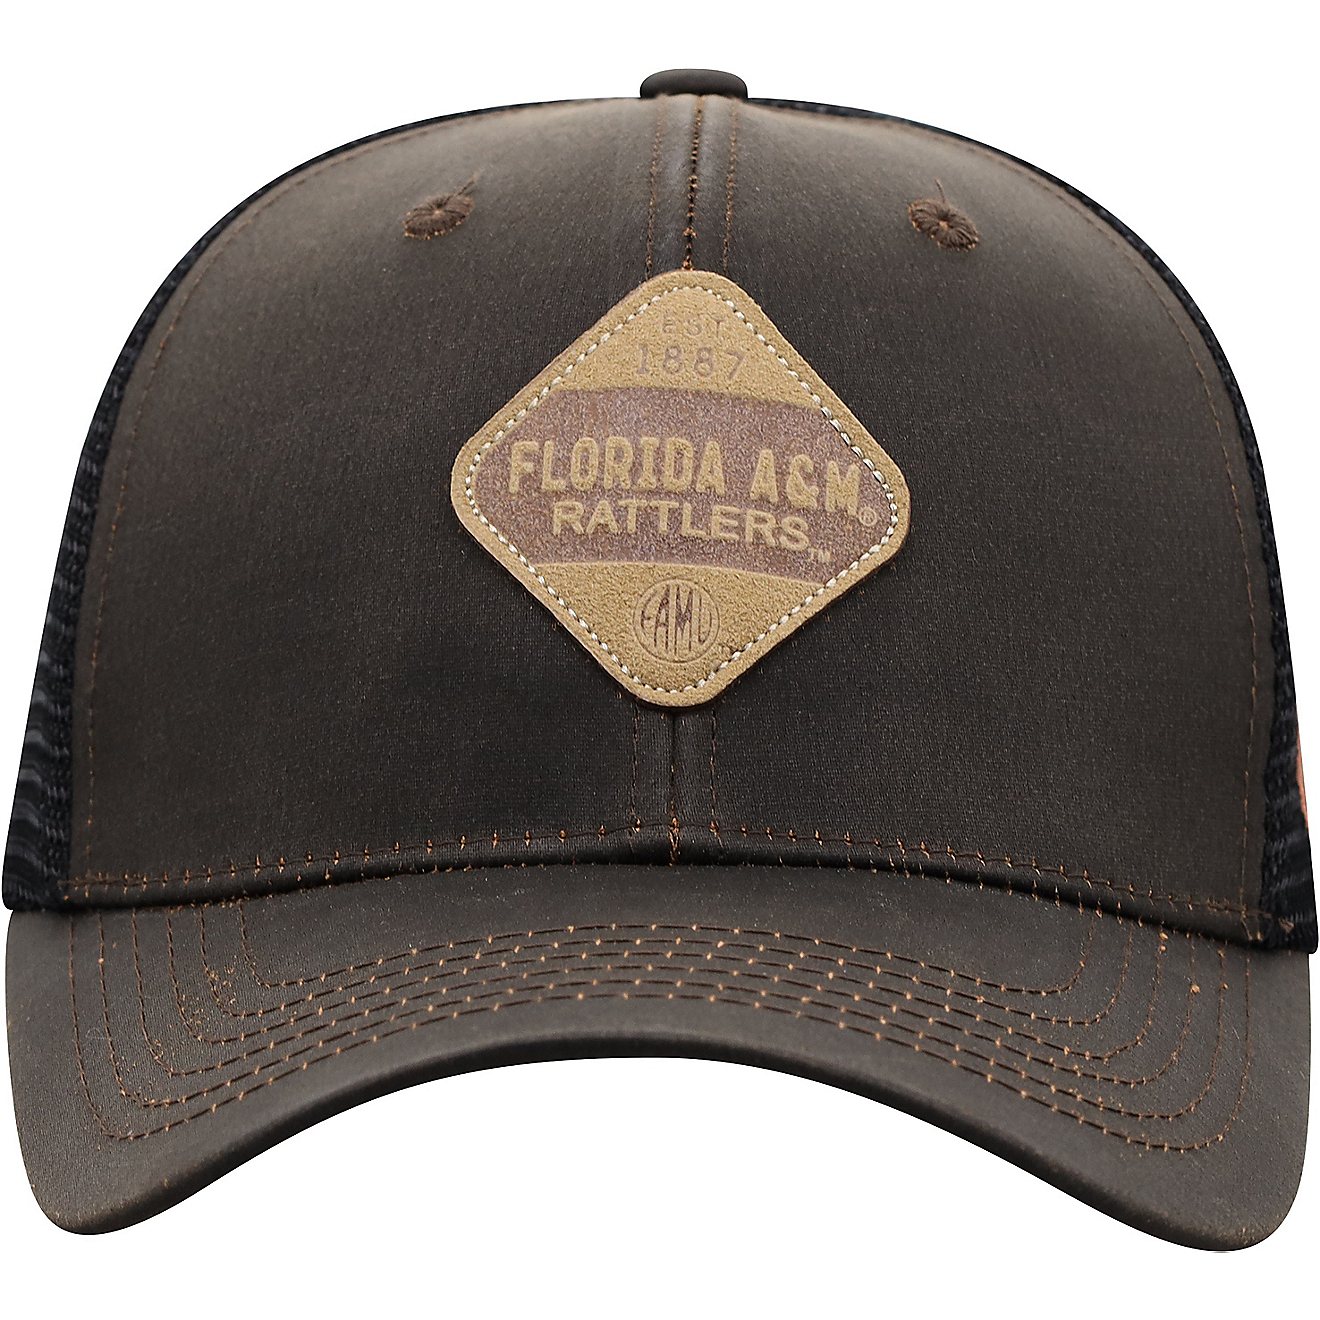 Top of The World Florida A&M University Elm Adjustable Cap                                                                       - view number 3